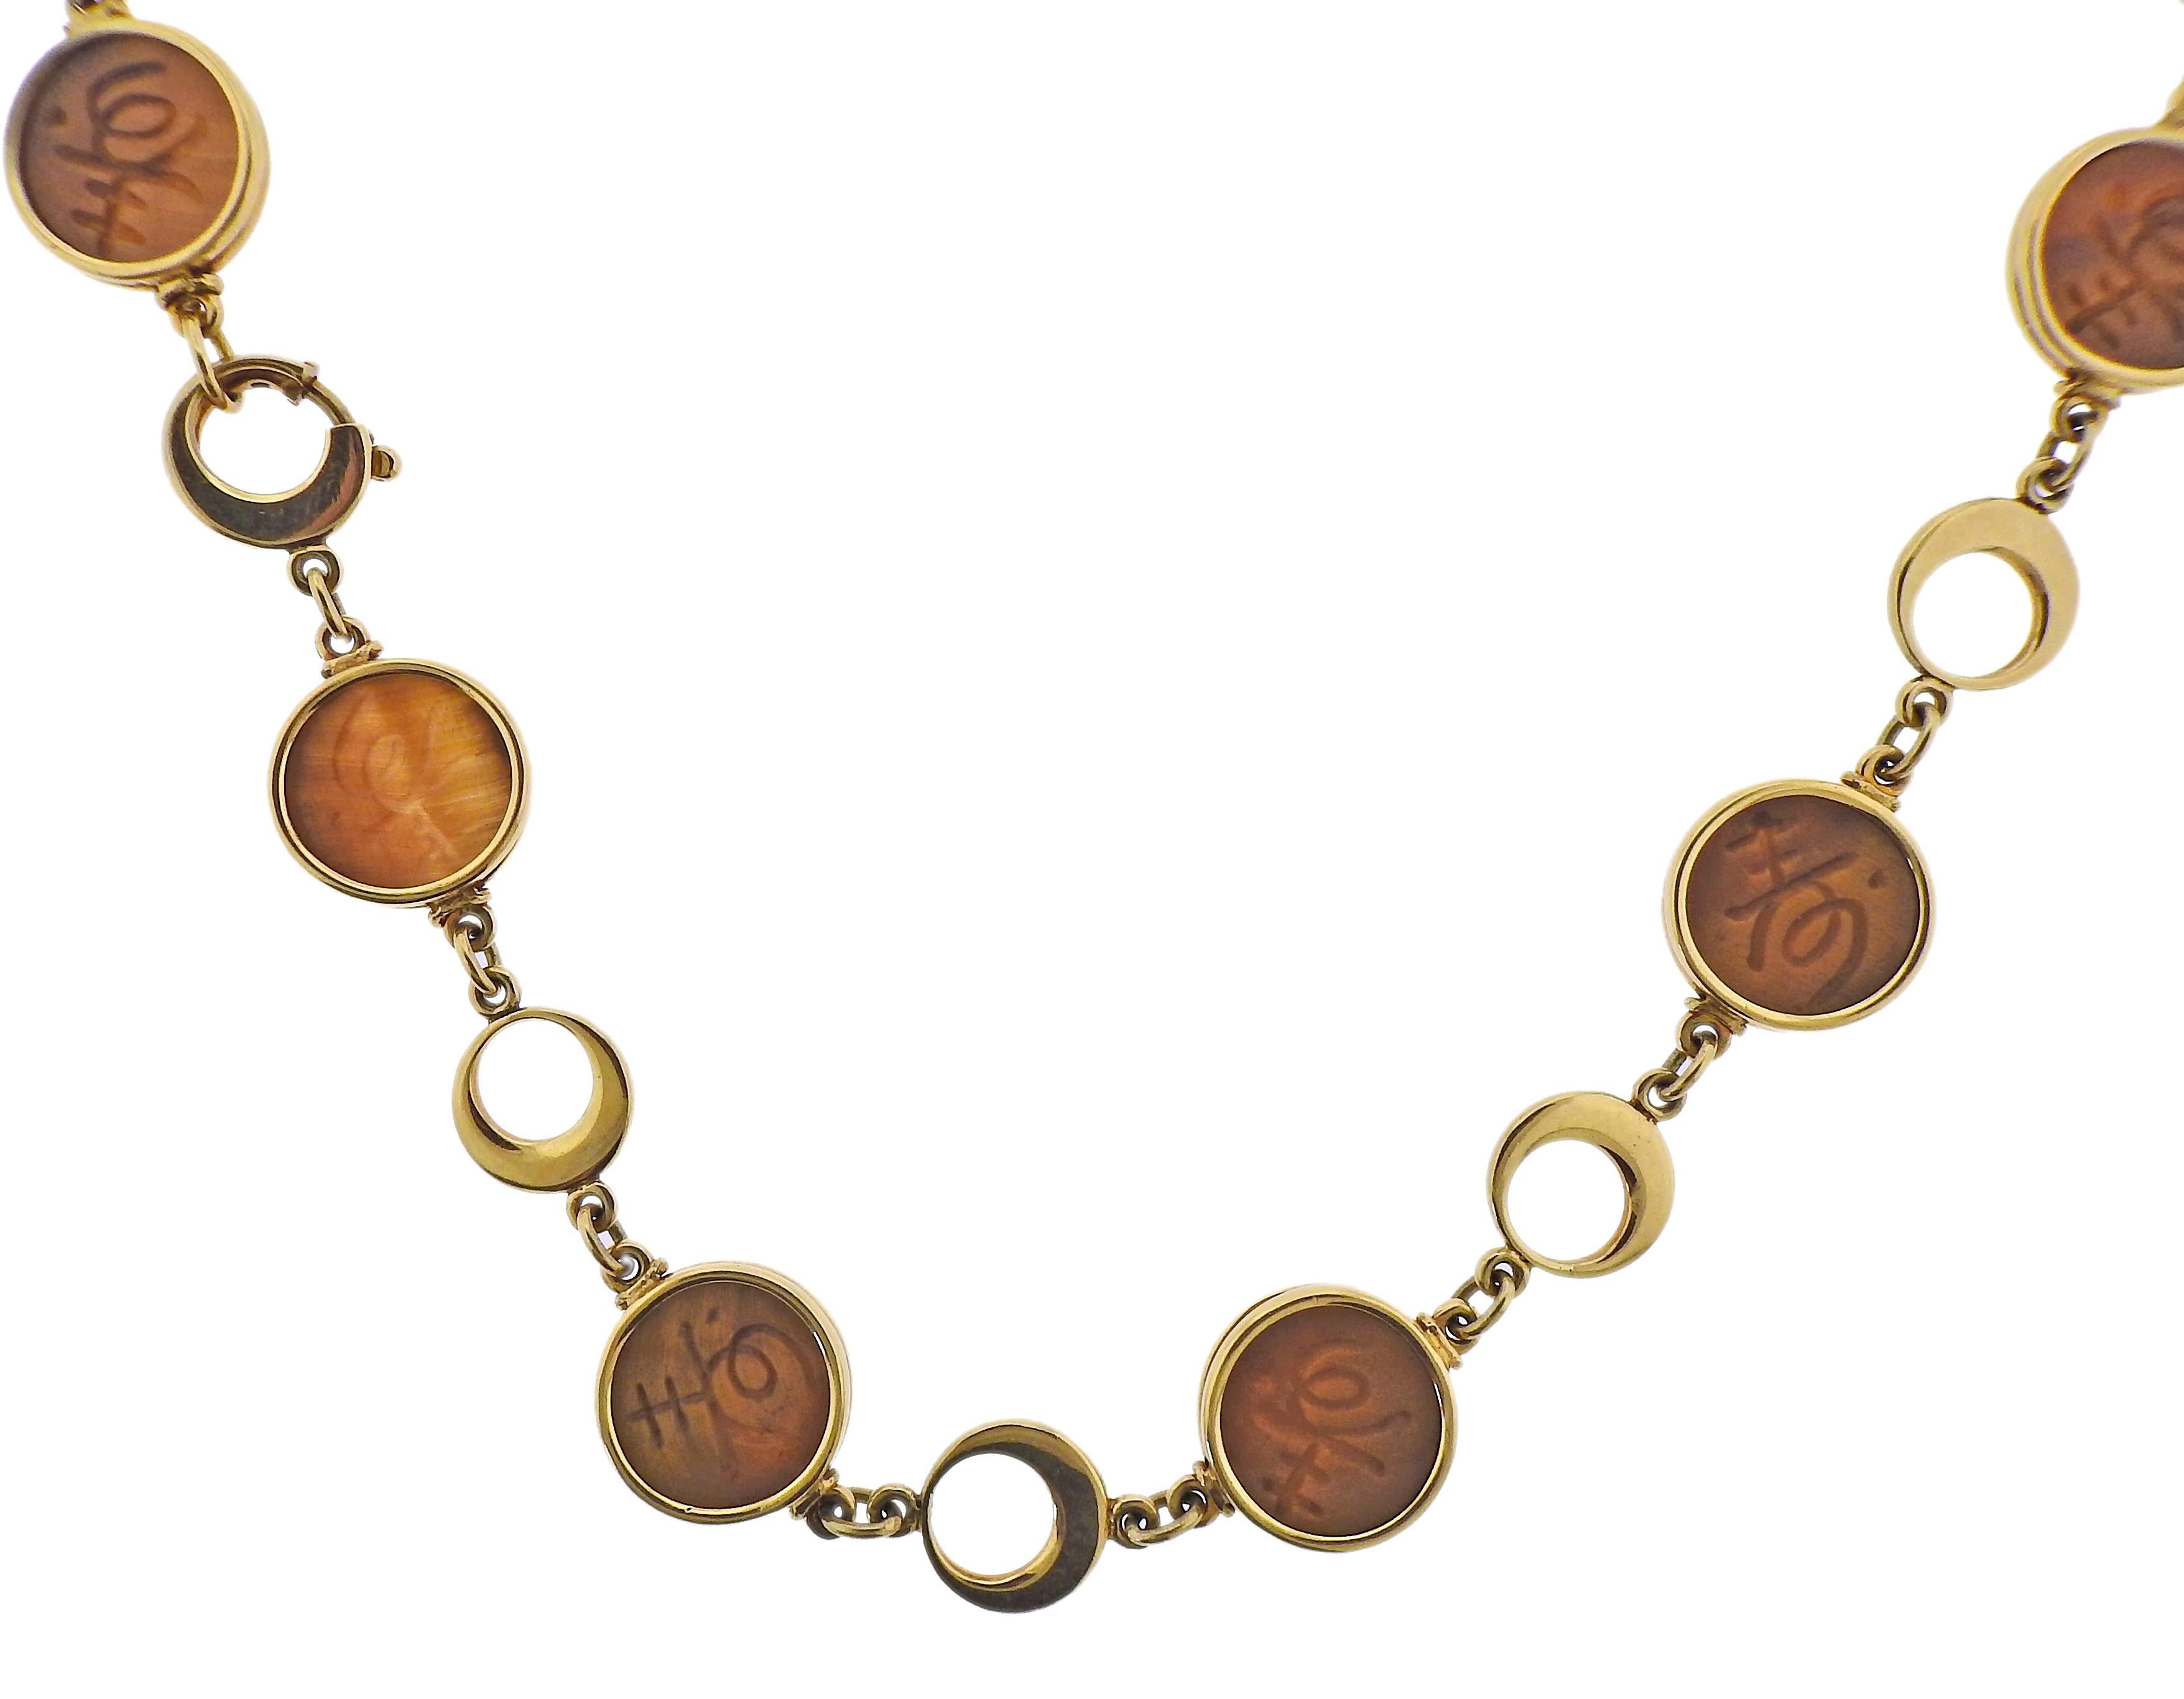 18k yellow gold circle link necklace with carved tiger's eye. Necklace is 34